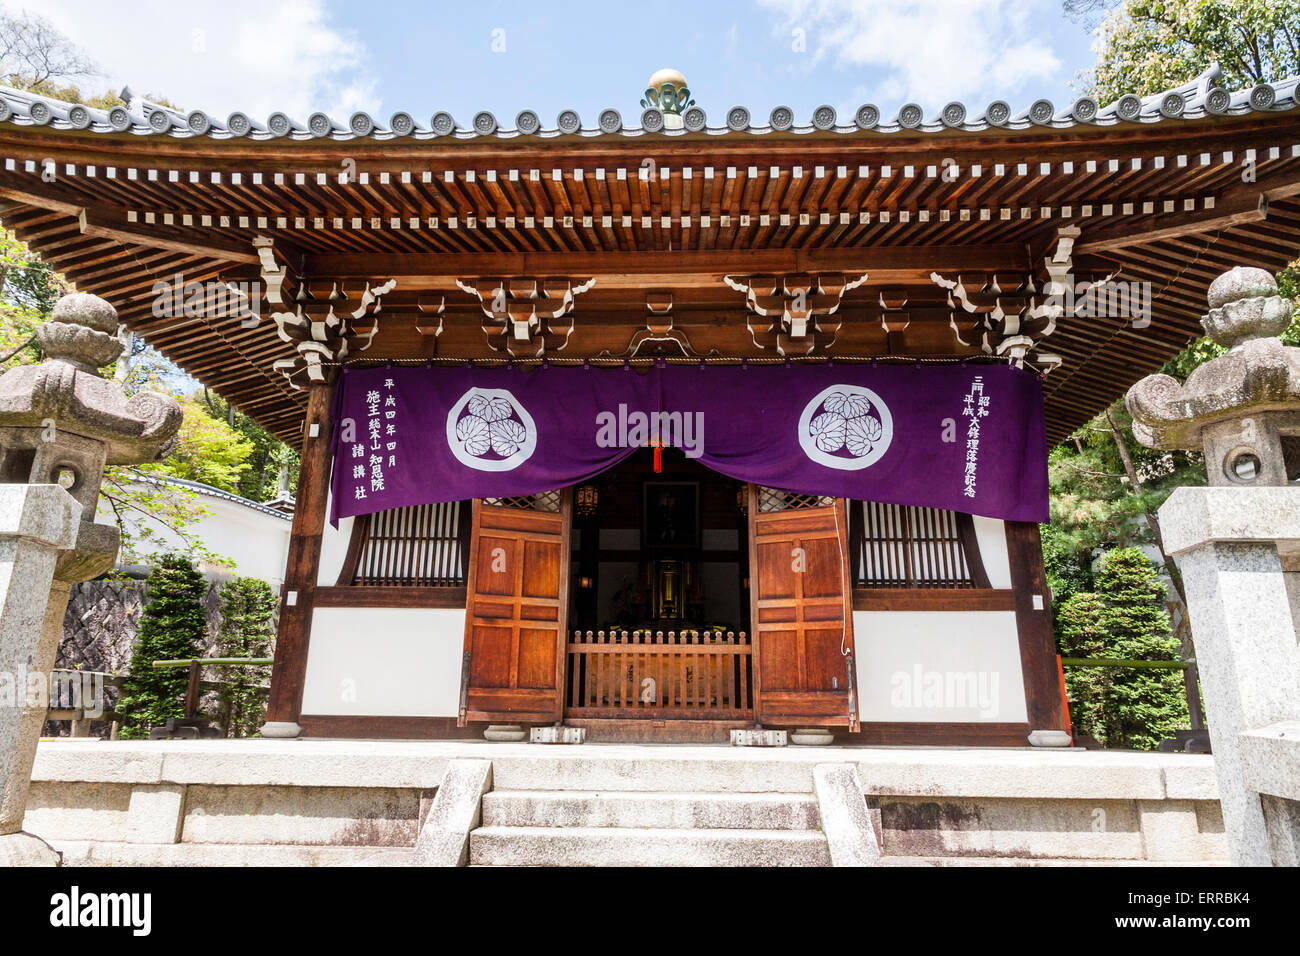 The hilltop Maursoleum and sub shrine at the Chion-in temple, Kyoto. Open main doors with purple banners for Tokugawa Aoi, hanging from the roof eaves. Stock Photo